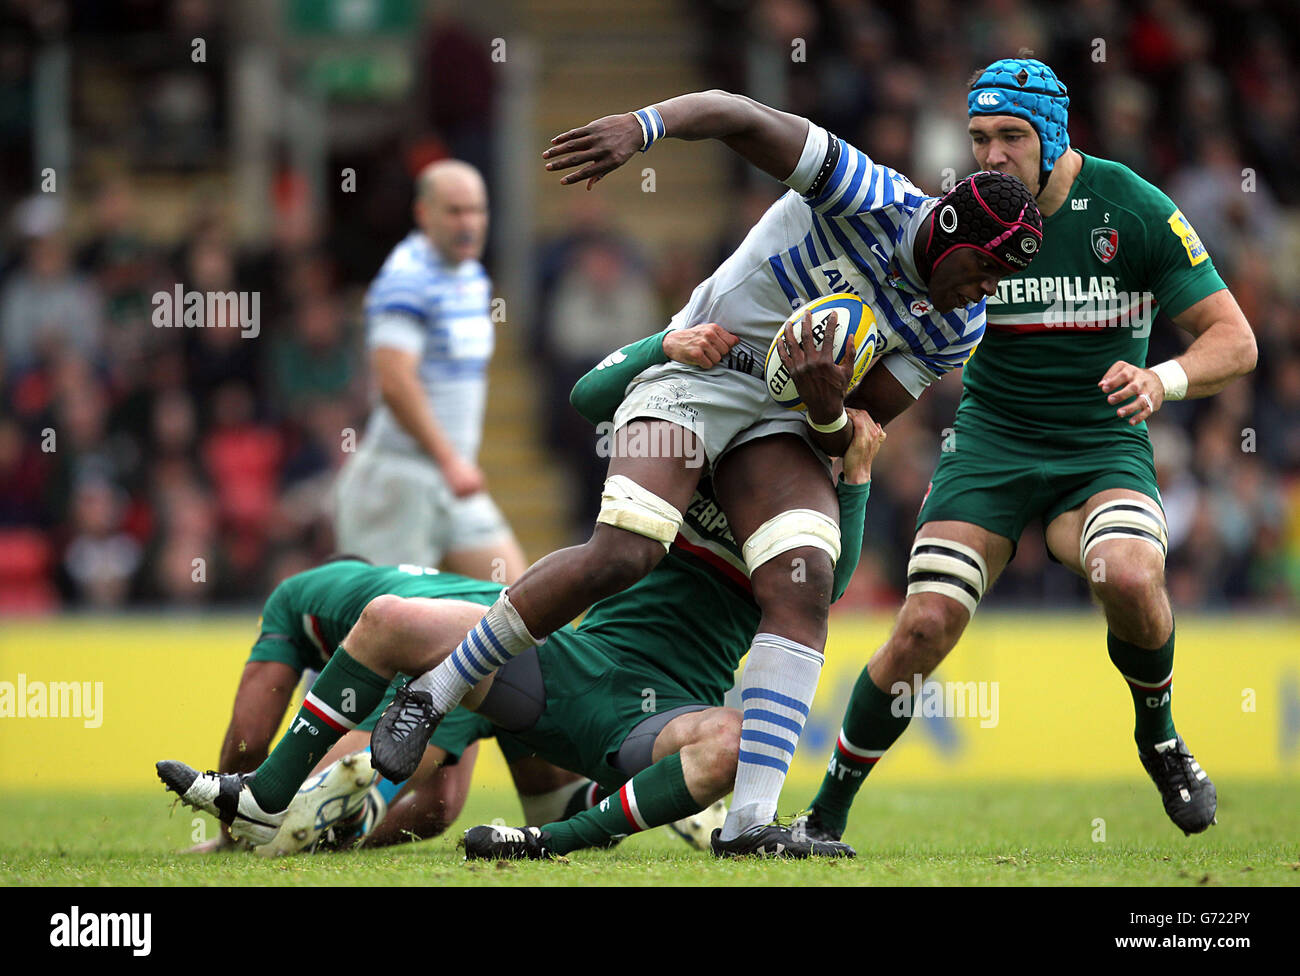 Rugby Union - Aviva Premiership - Leicester Tigers v Saracens - Welford Road. Saracens' Maro Itoje is tackled by Leicester Tigers' Mathew Tait during the Aviva Premiership match at Welford Road, Leicester. Stock Photo